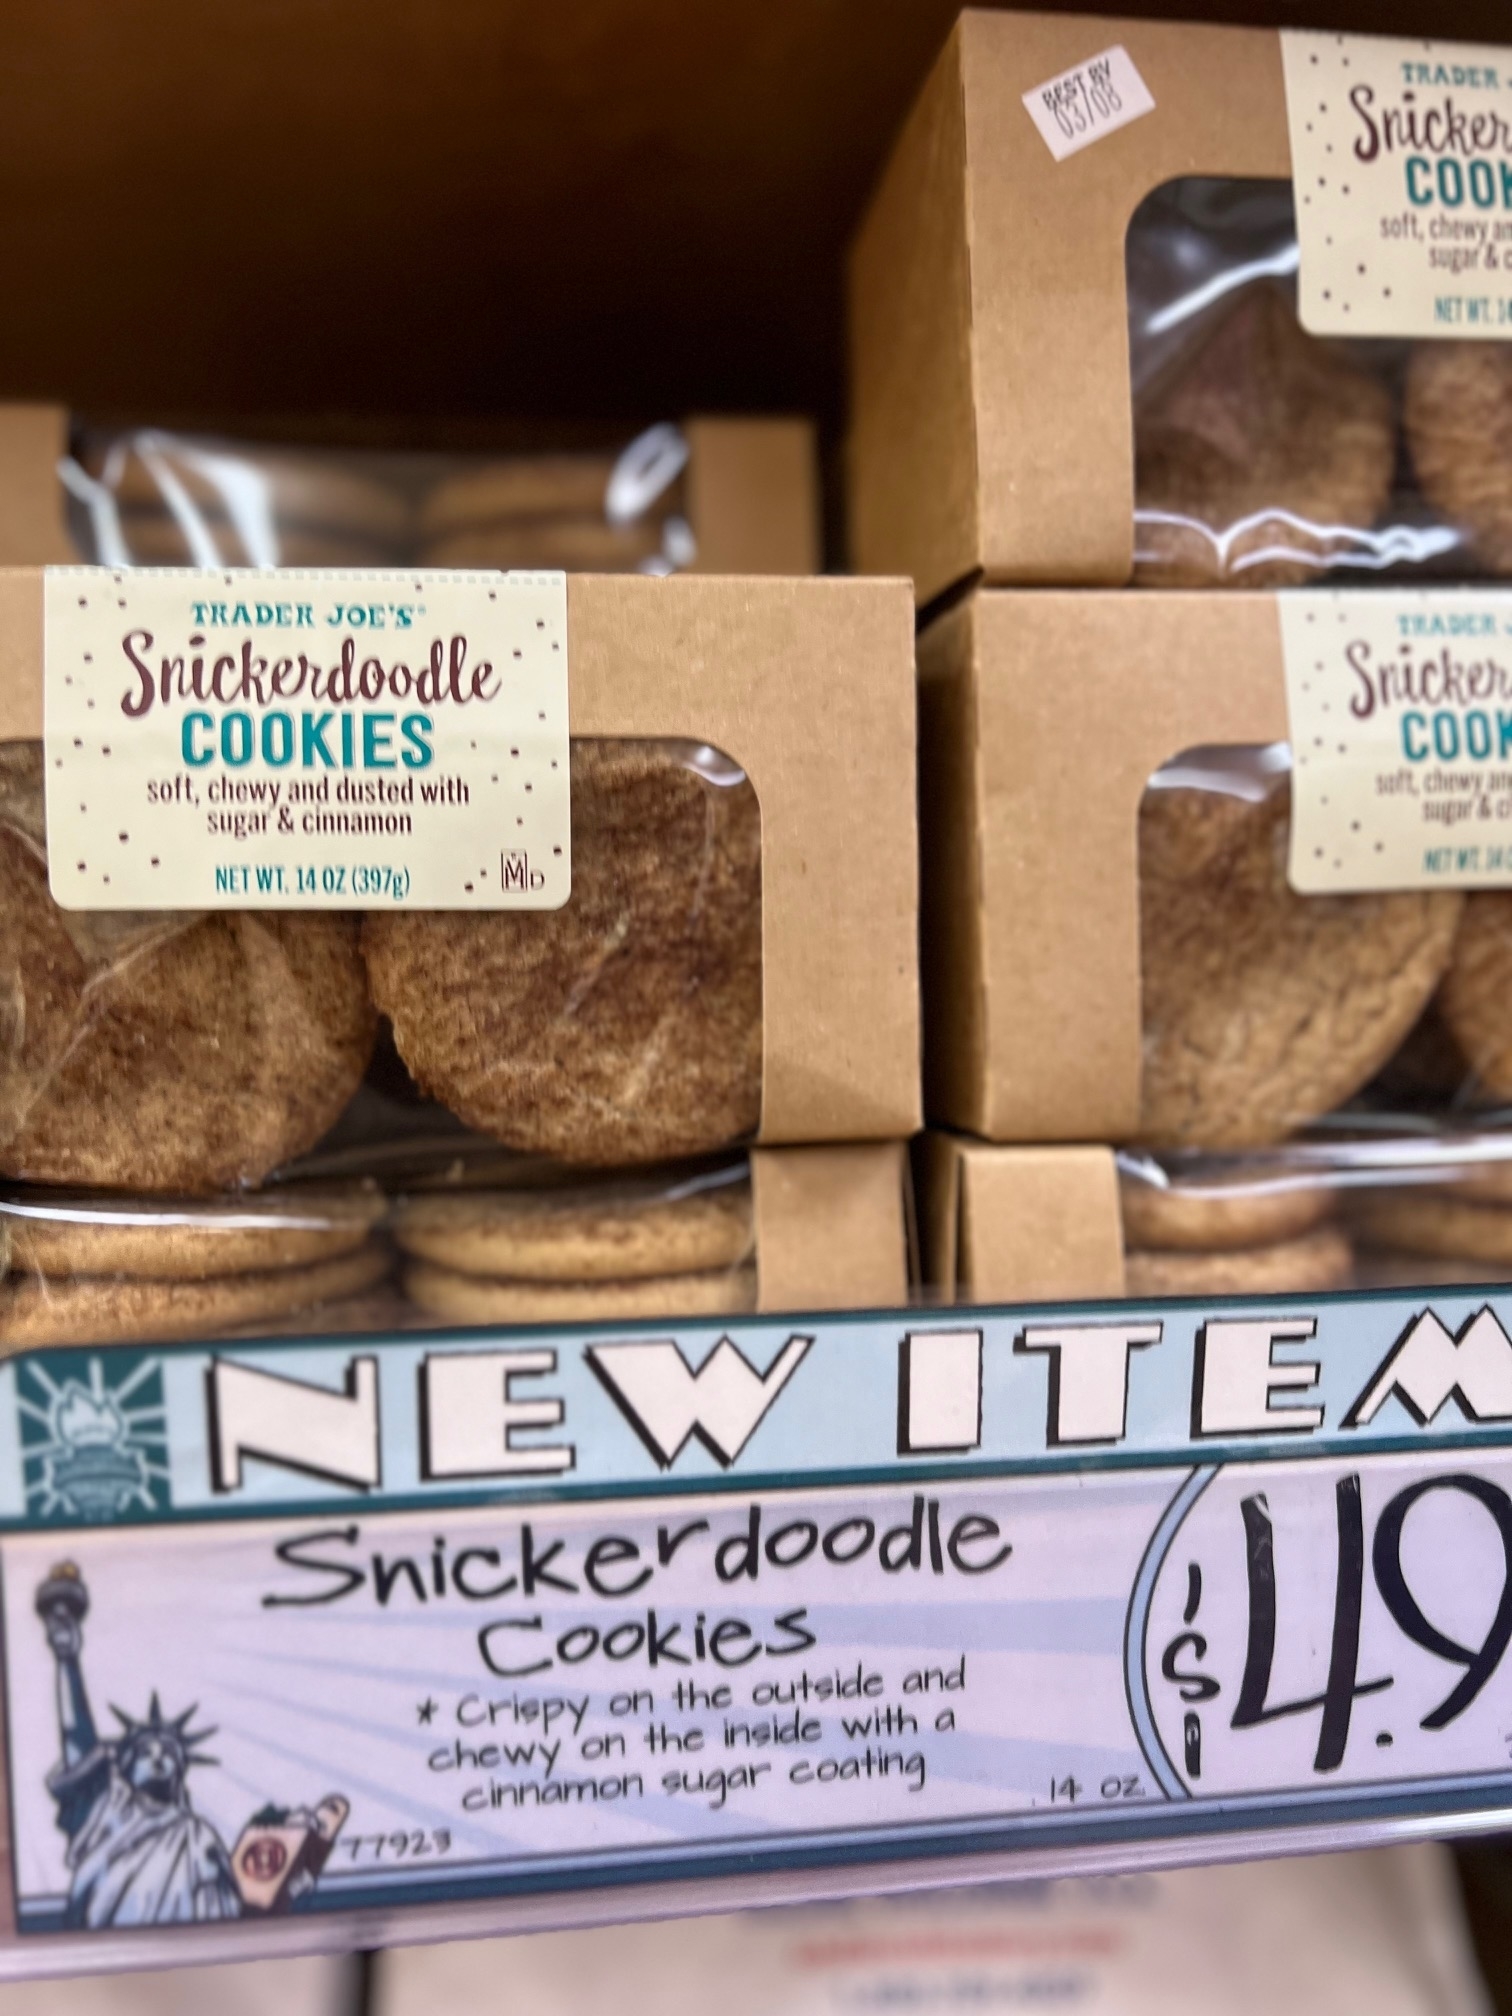 Shelves stocked with Trader Joe&#x27;s Snickerdoodle Cookies, labeled as a new item, with a price tag of $4.99